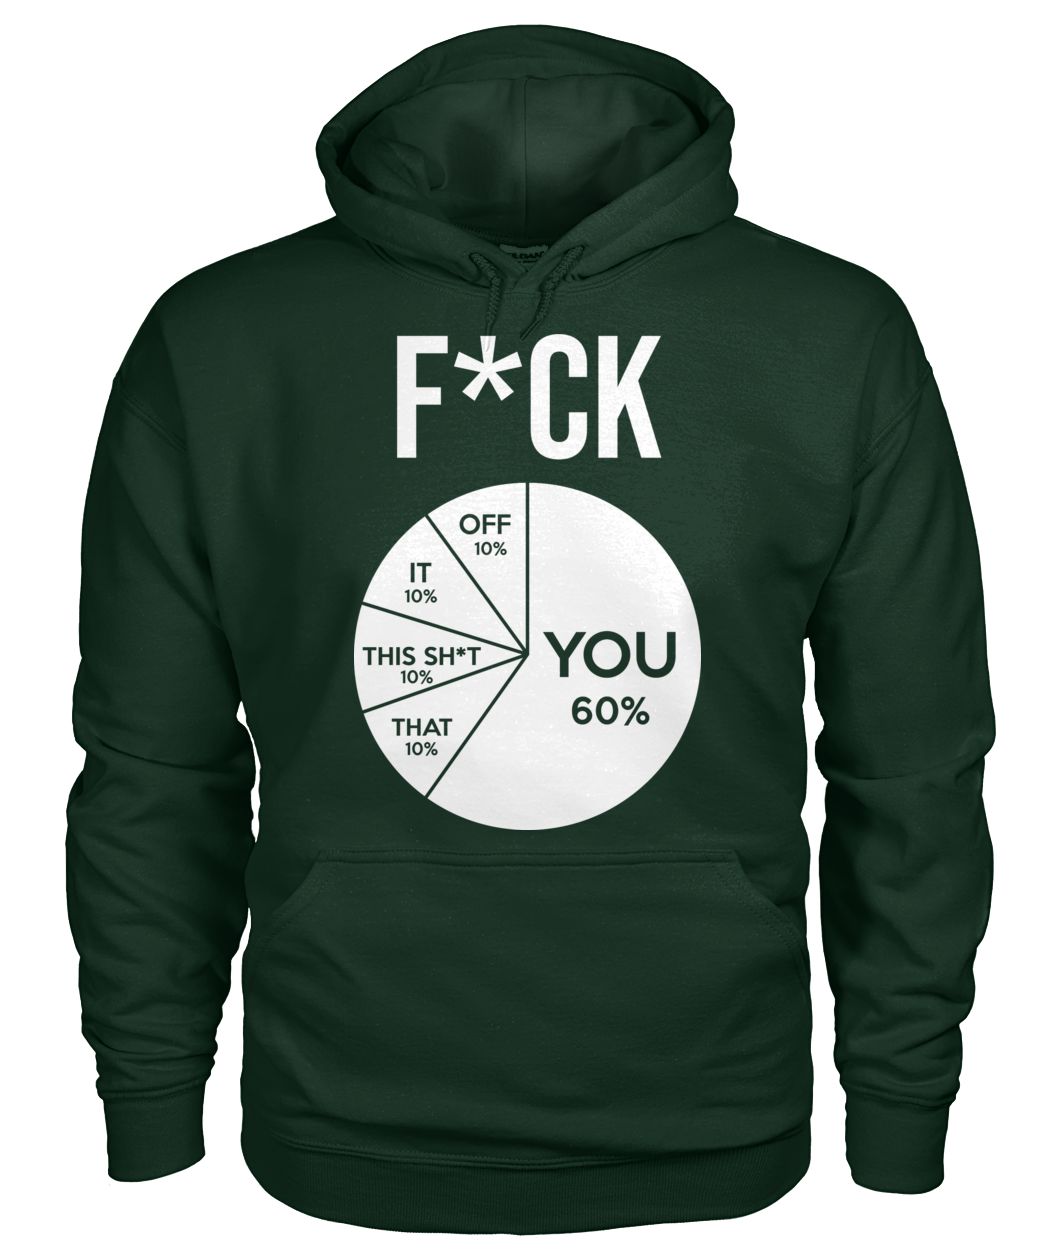 Fuck pie chart you 60% off 10% it 10% this shit 10% that 10% gildan hoodie